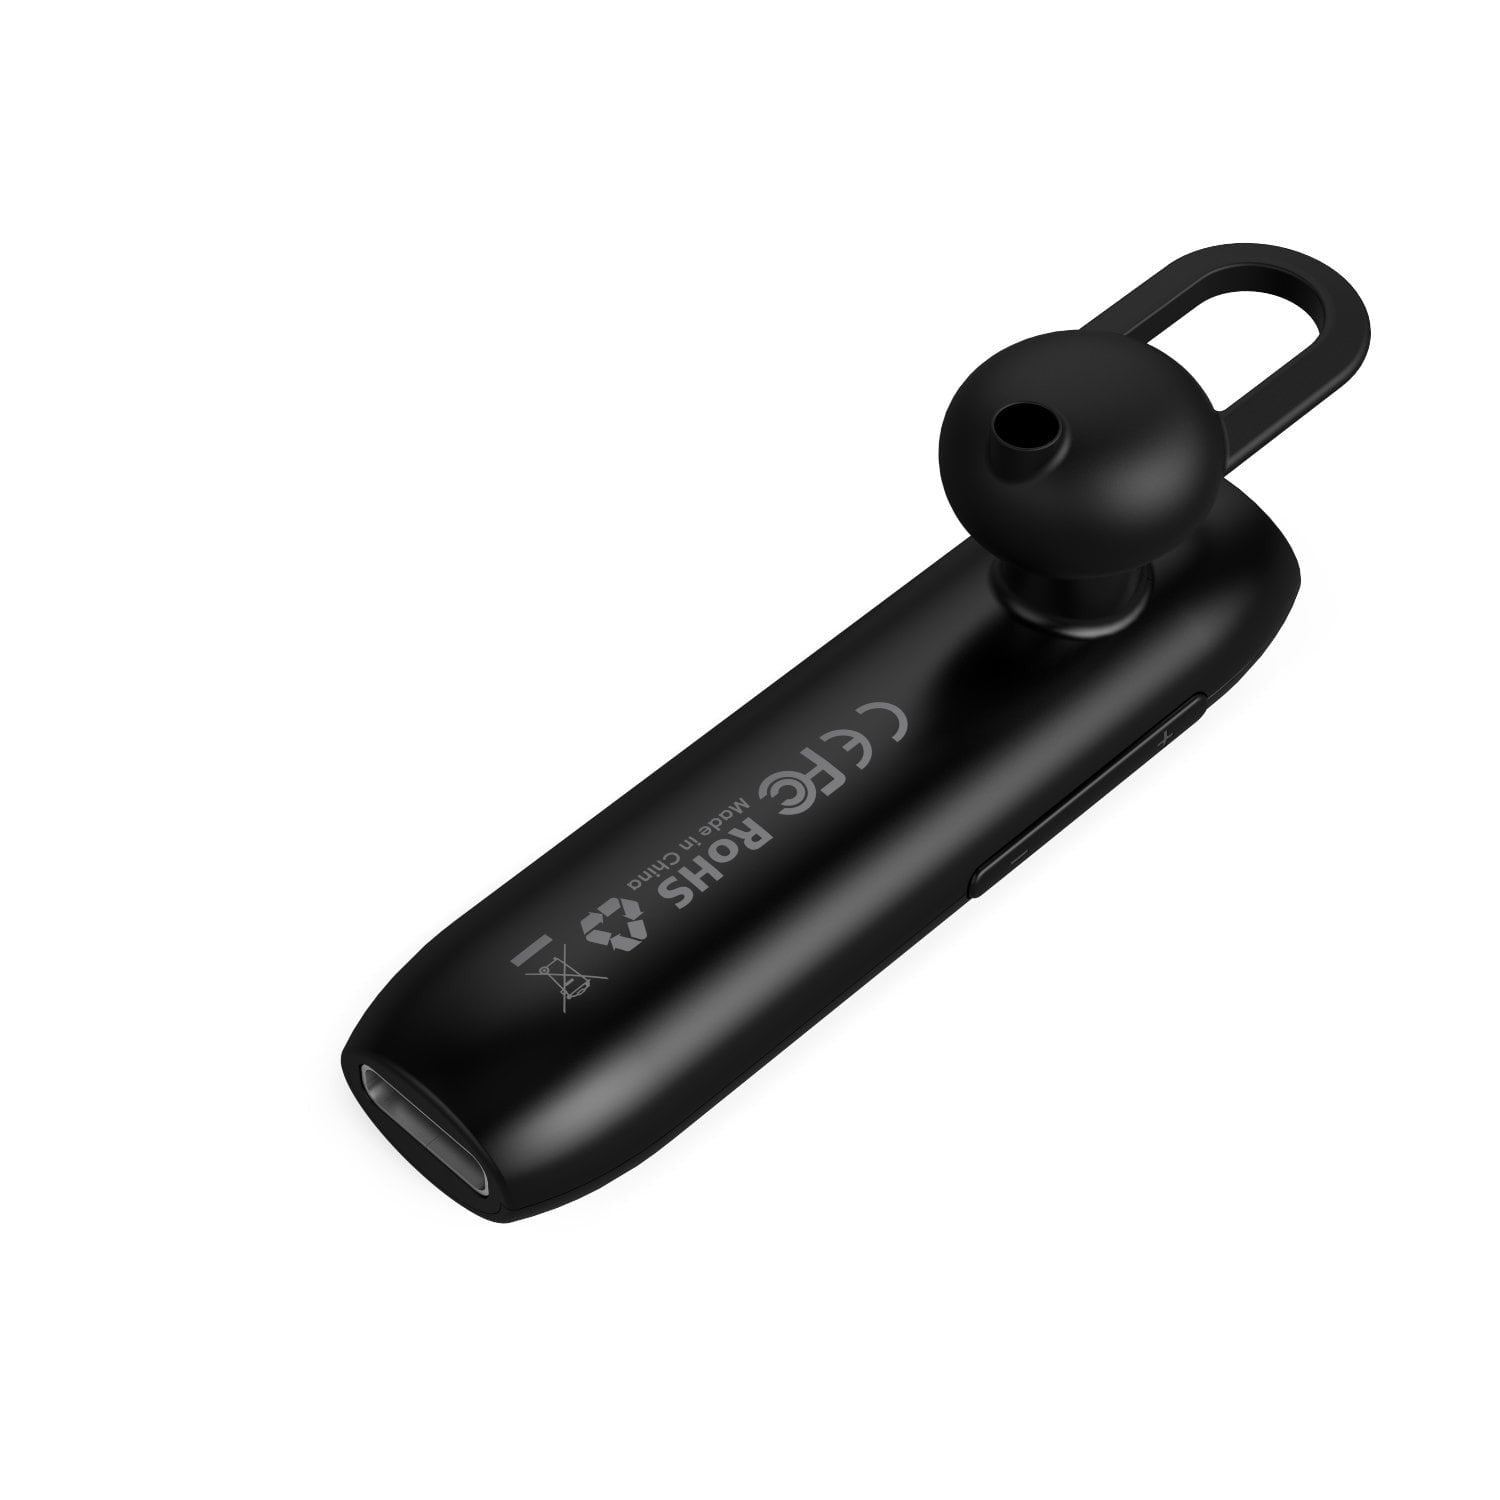 AUKEY EP-B31 Bluetooth 4.1 Headset Wireless earphone Hands Free - Aukey Malaysia Official Store